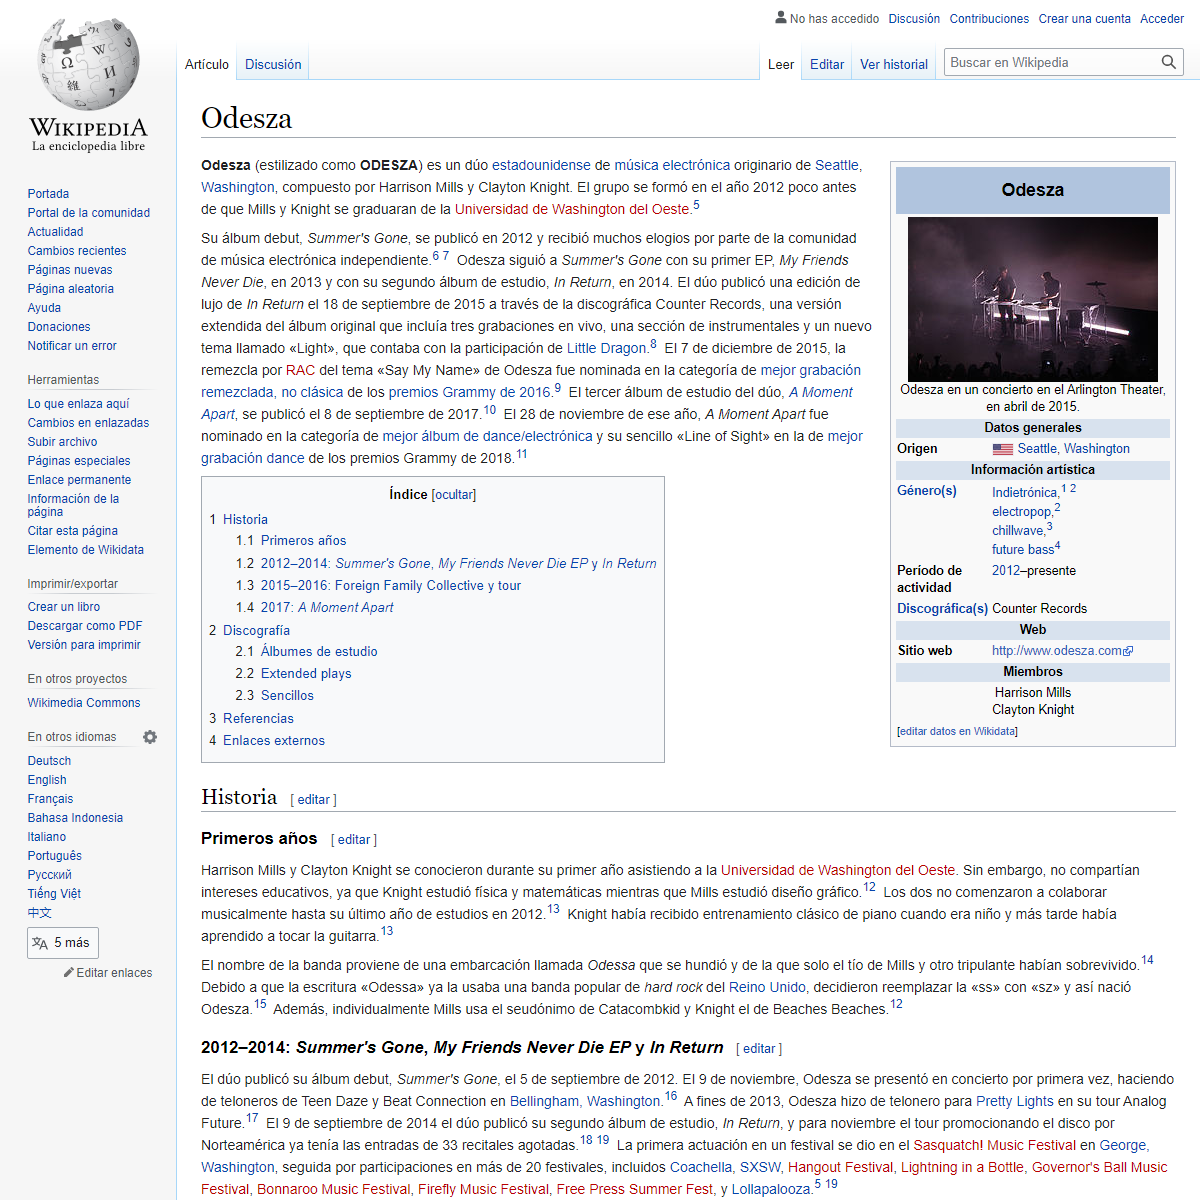 A complete backup of https://es.wikipedia.org/wiki/Odesza